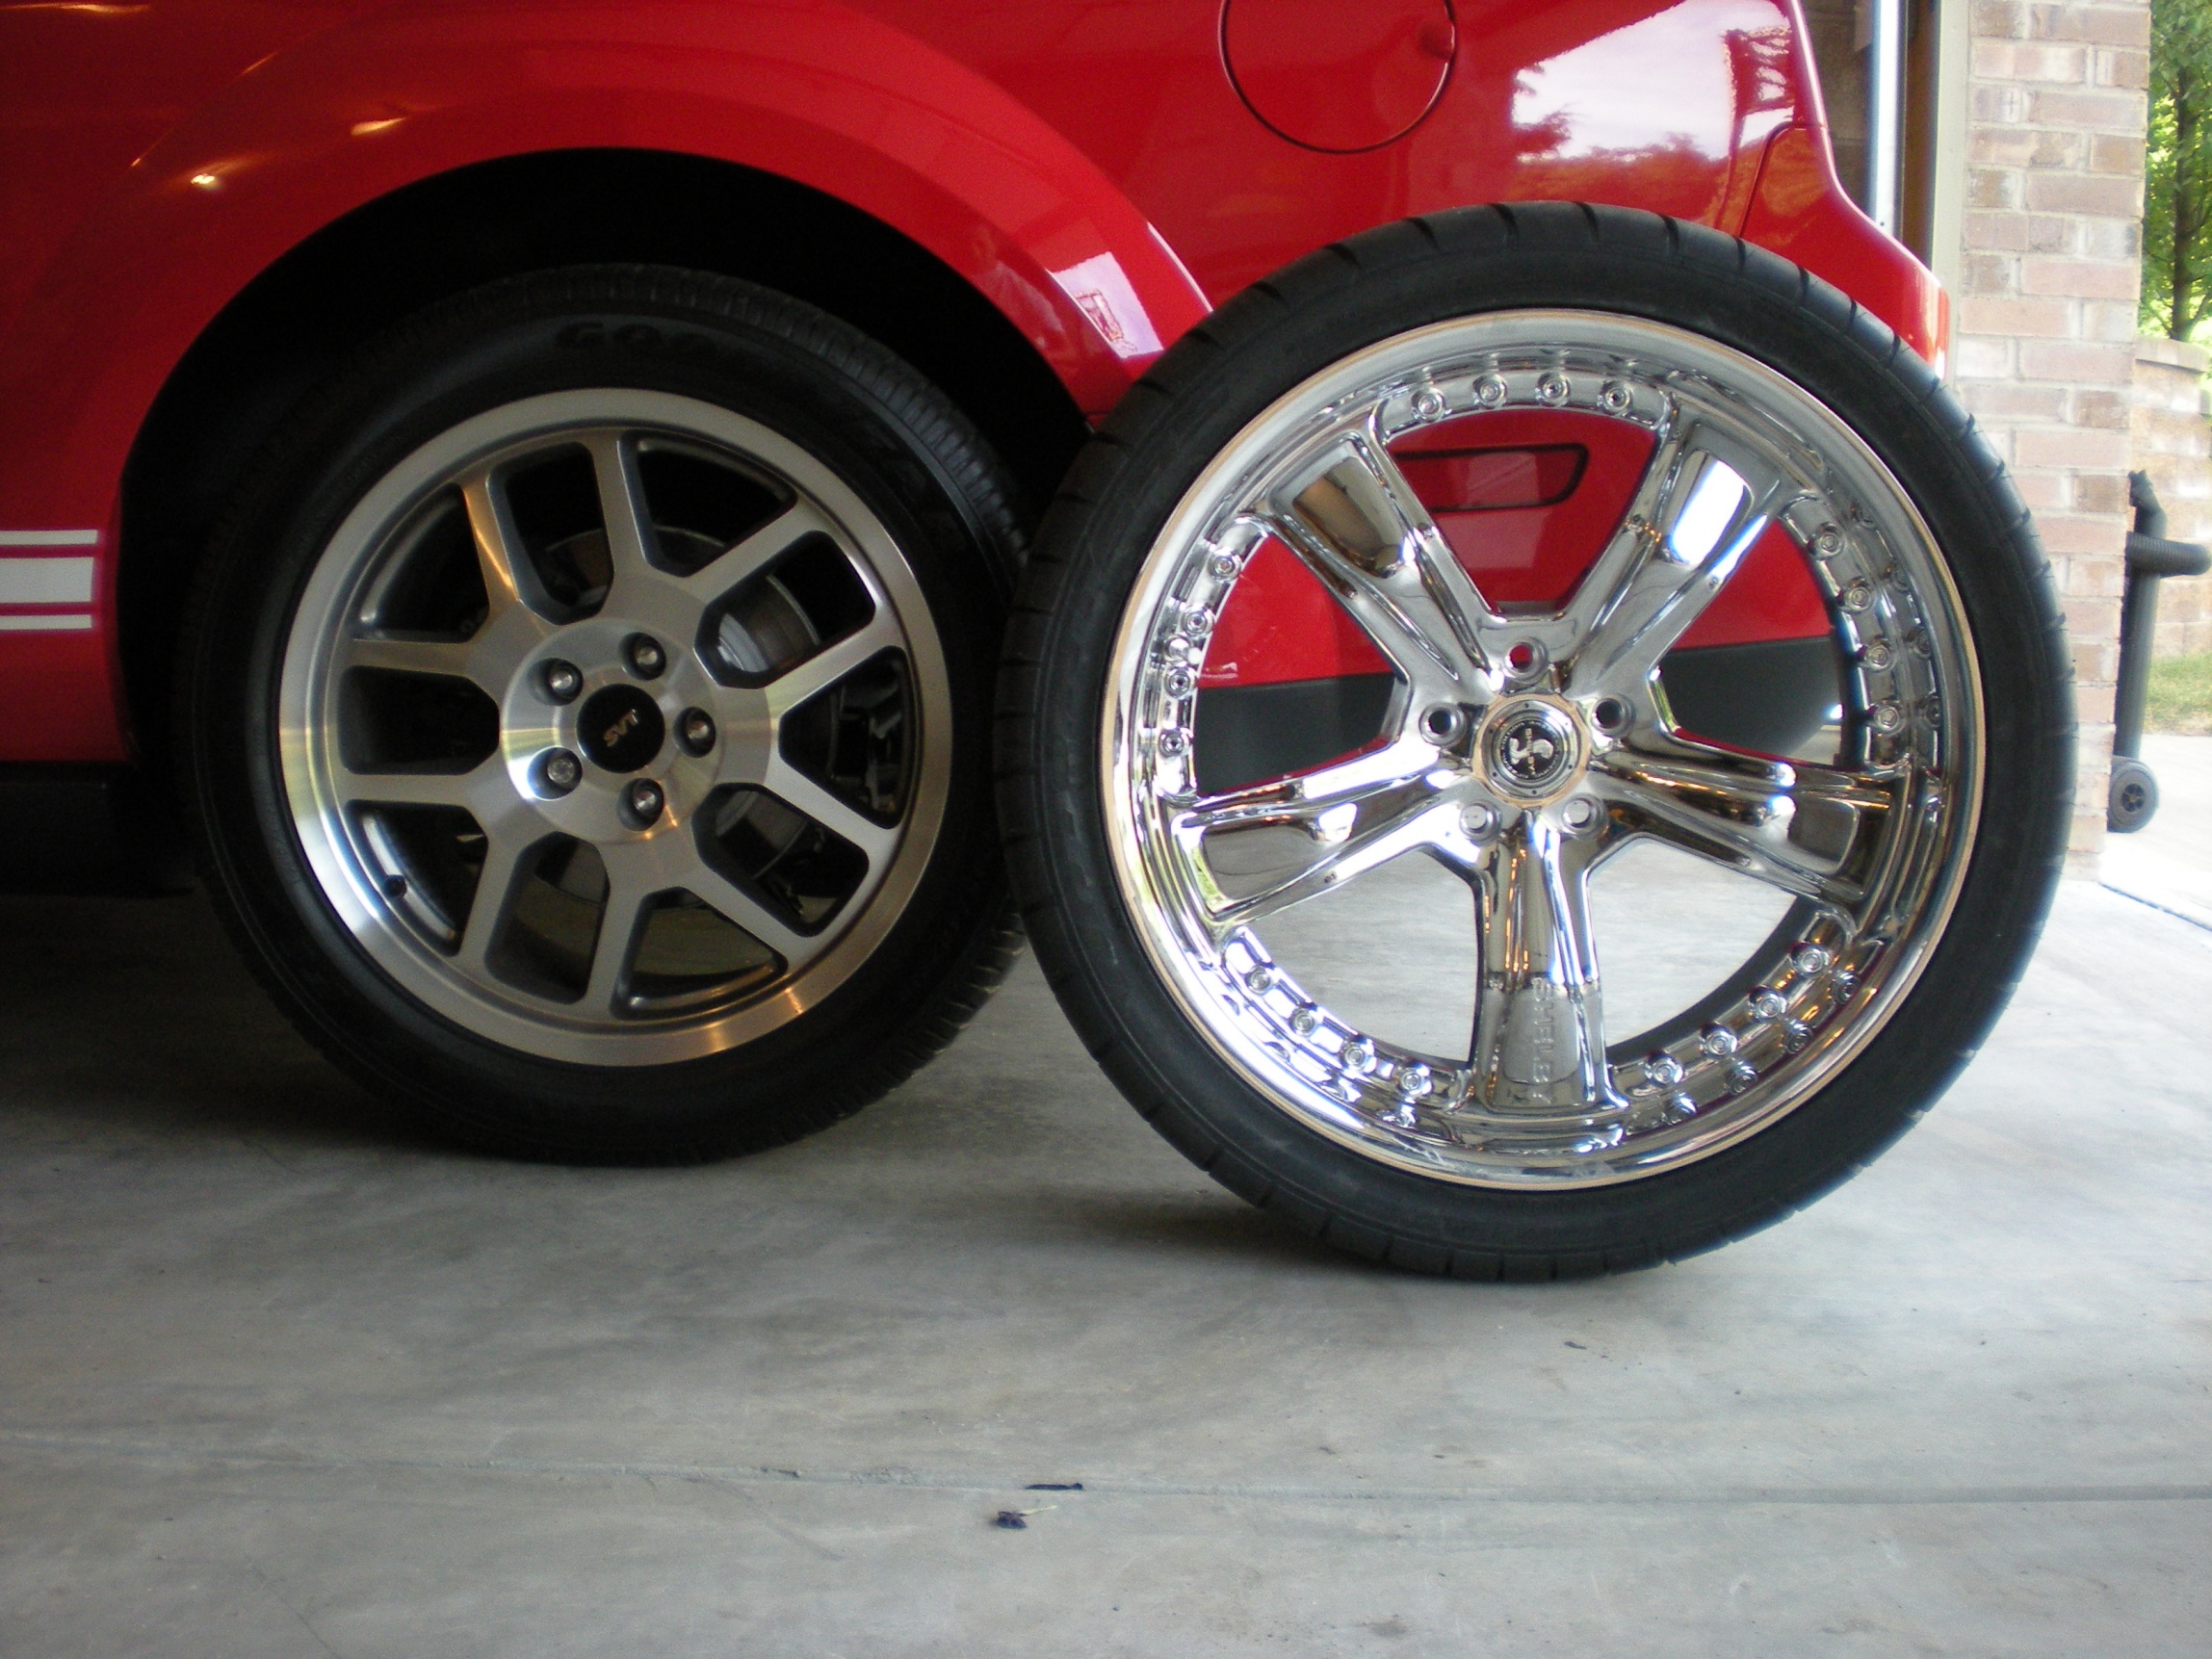 Pix of any 20" rims? - The Mustang Source - Ford Mustang Forums 17 Inch Rims Vs 20 Inch Rims